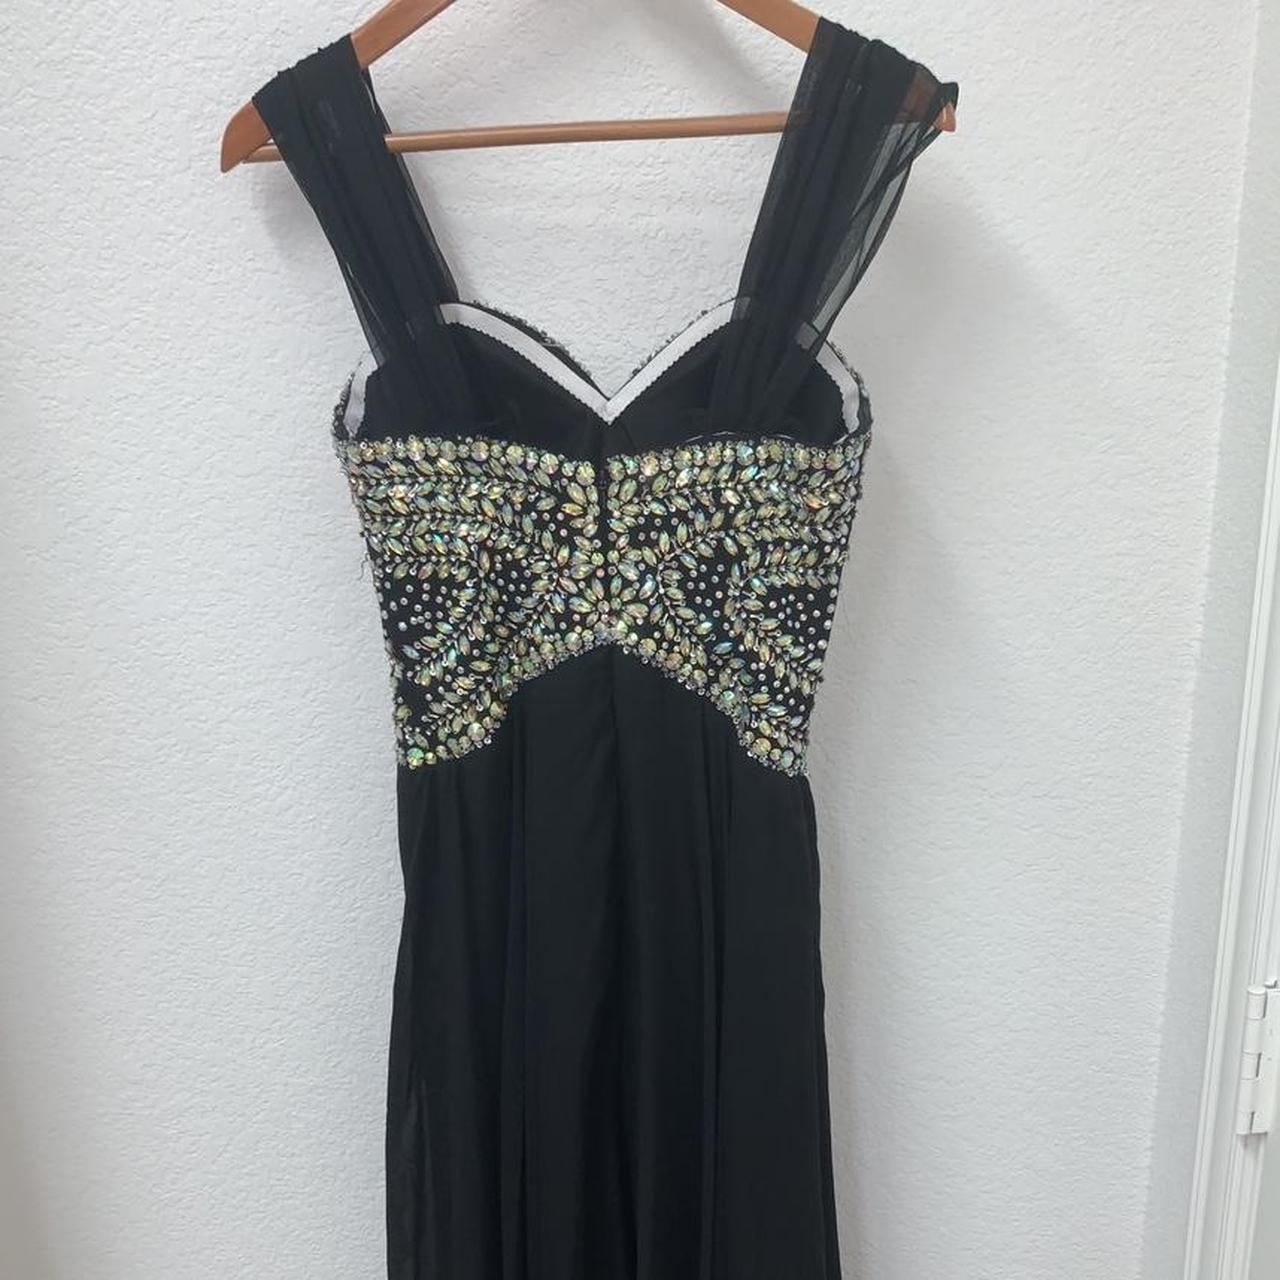 Women's Black and Silver Dress (3)